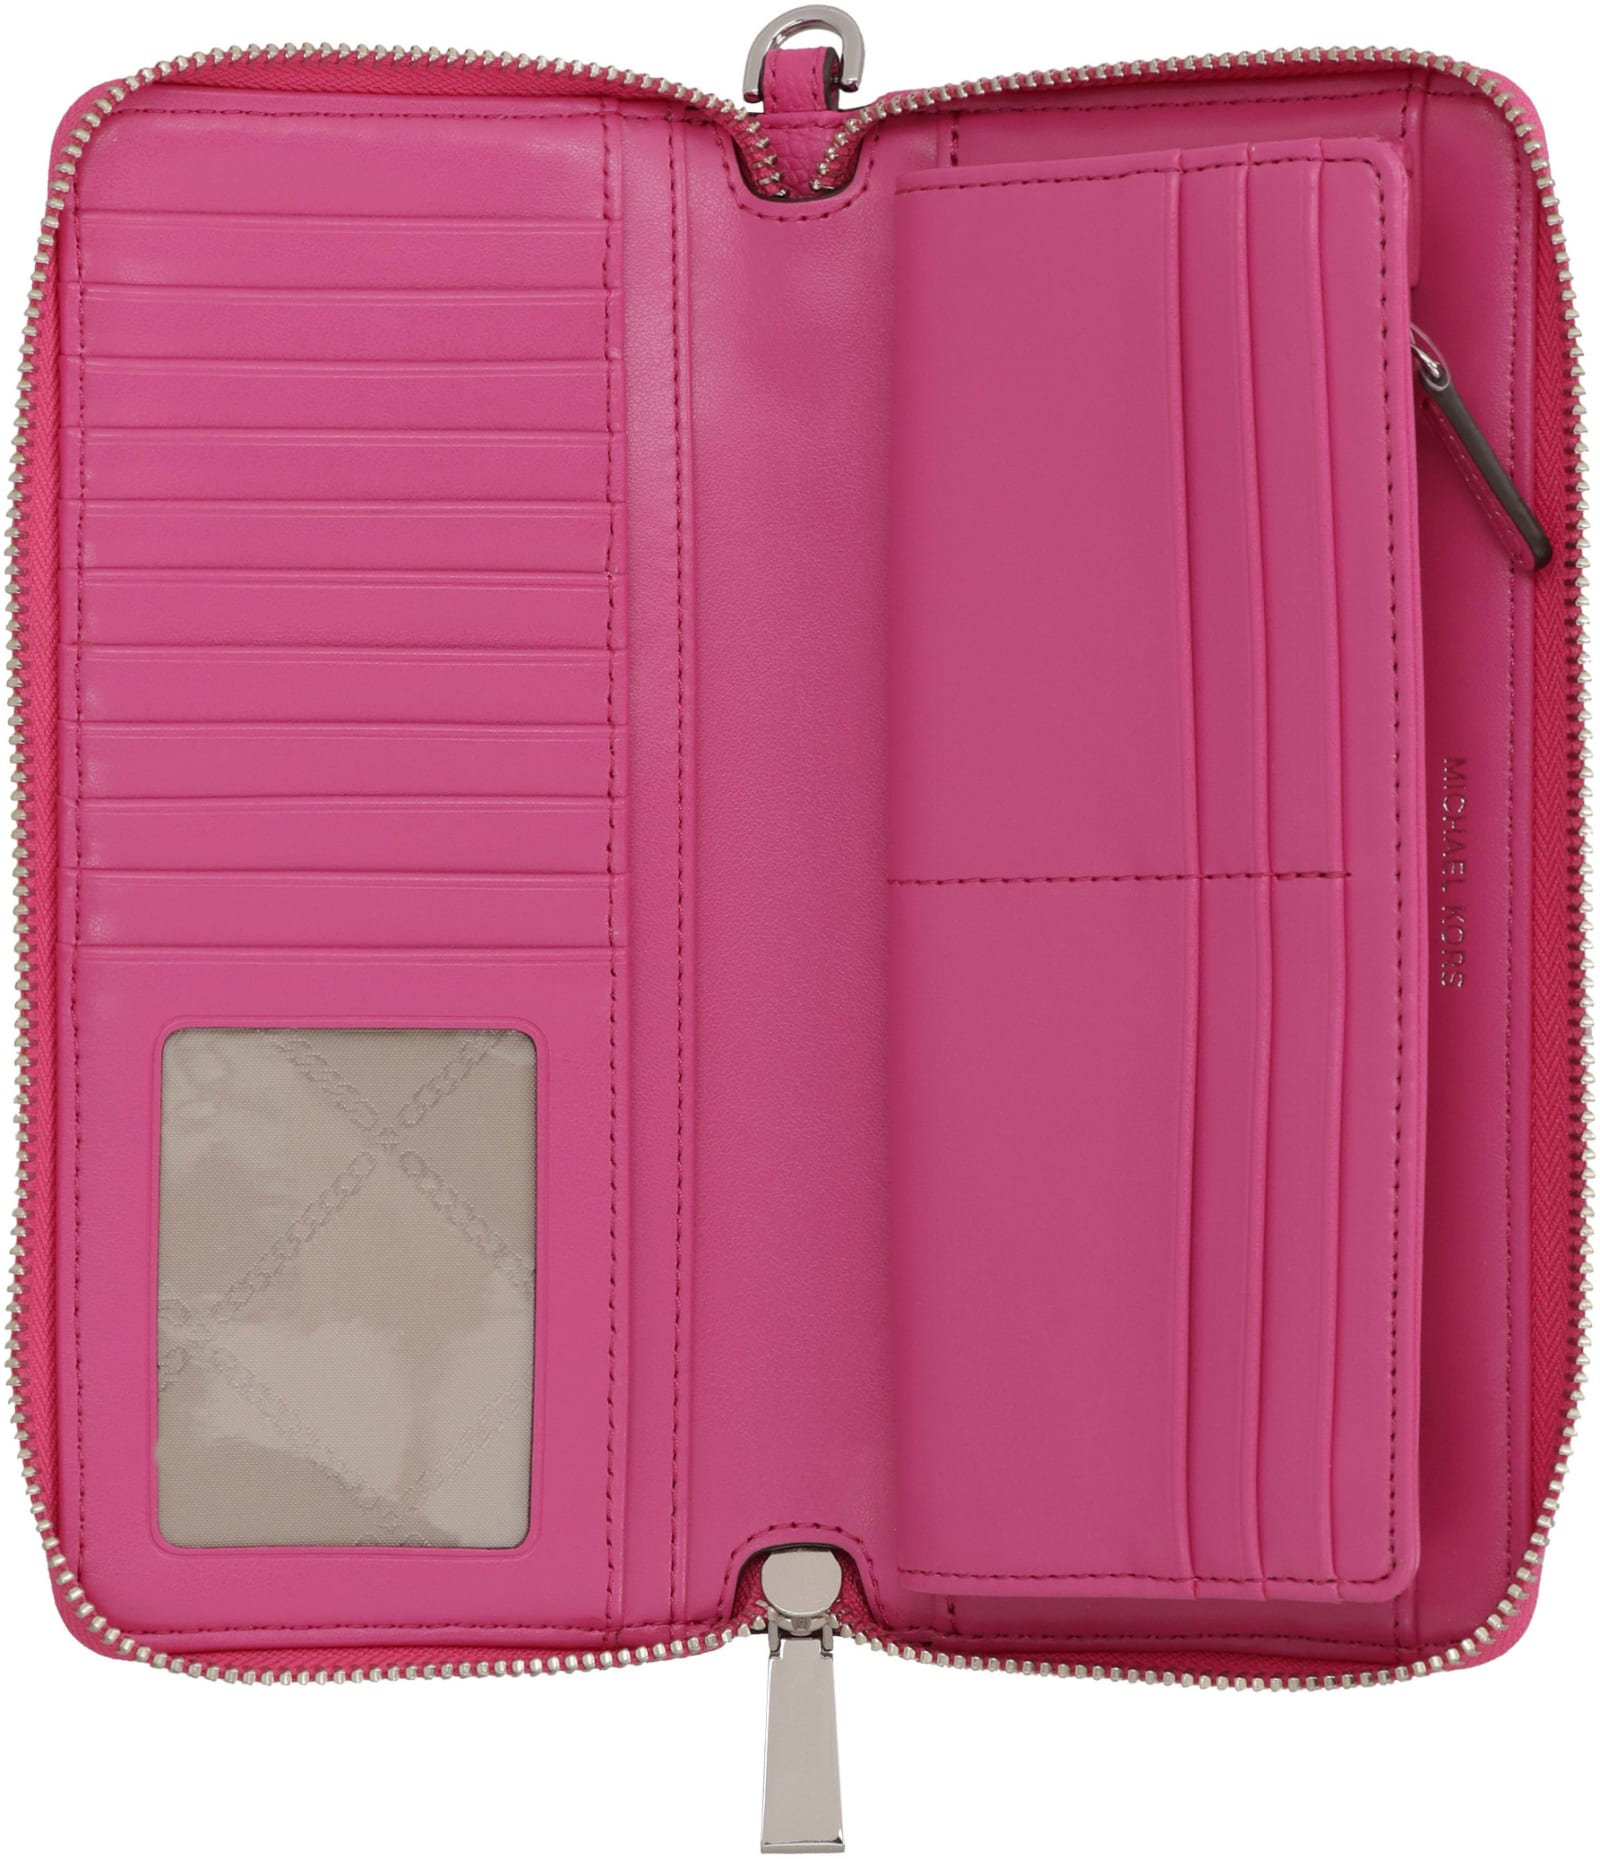 Jet set leather wallet Michael Kors Pink in Leather - 20414074